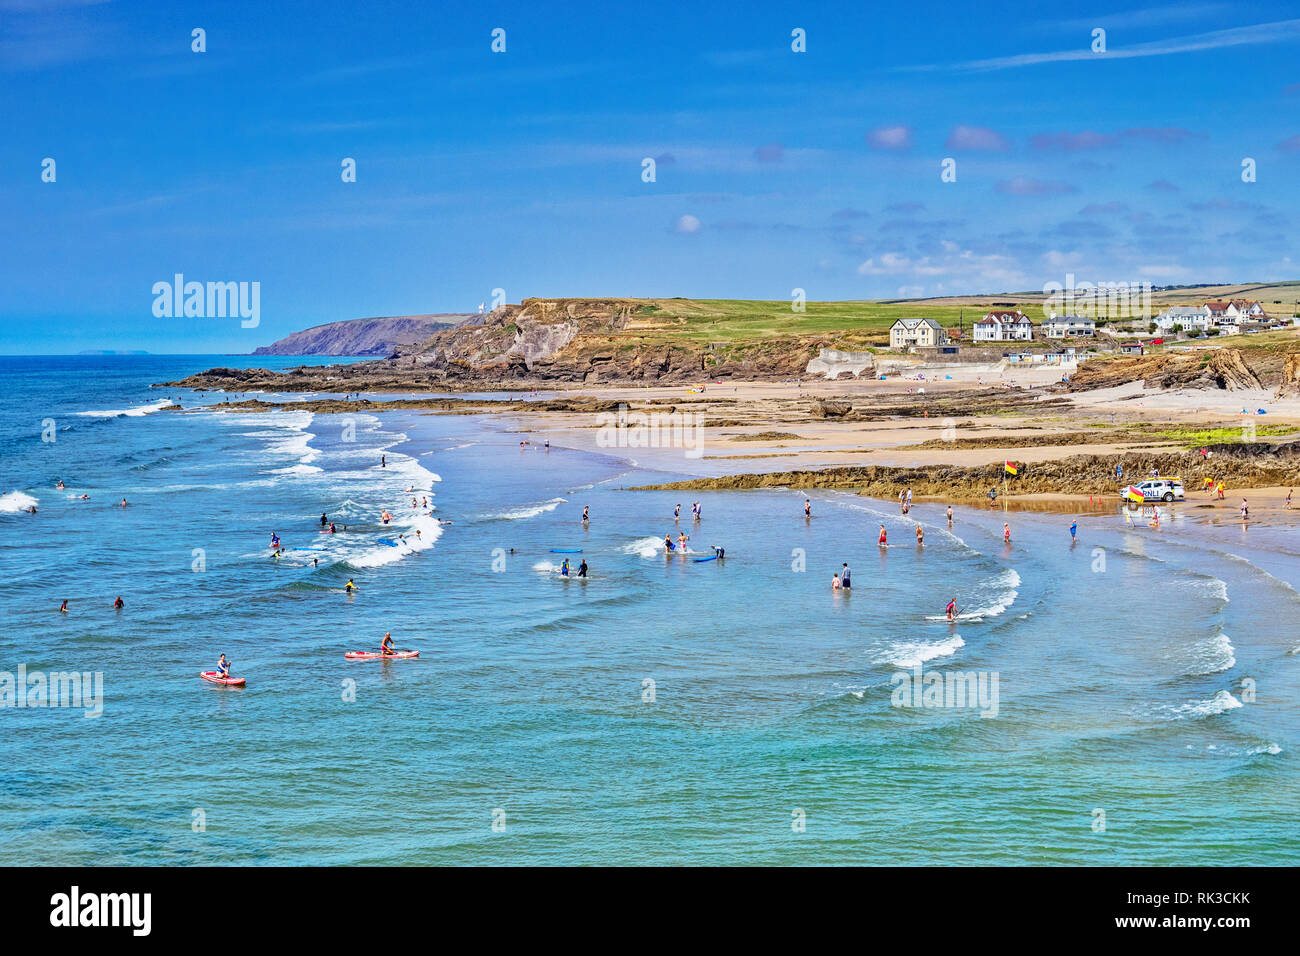 6 July 2018: Bude, Cornwall, UK - Crowds cooling off in the sea during the summer heatwave. Stock Photo